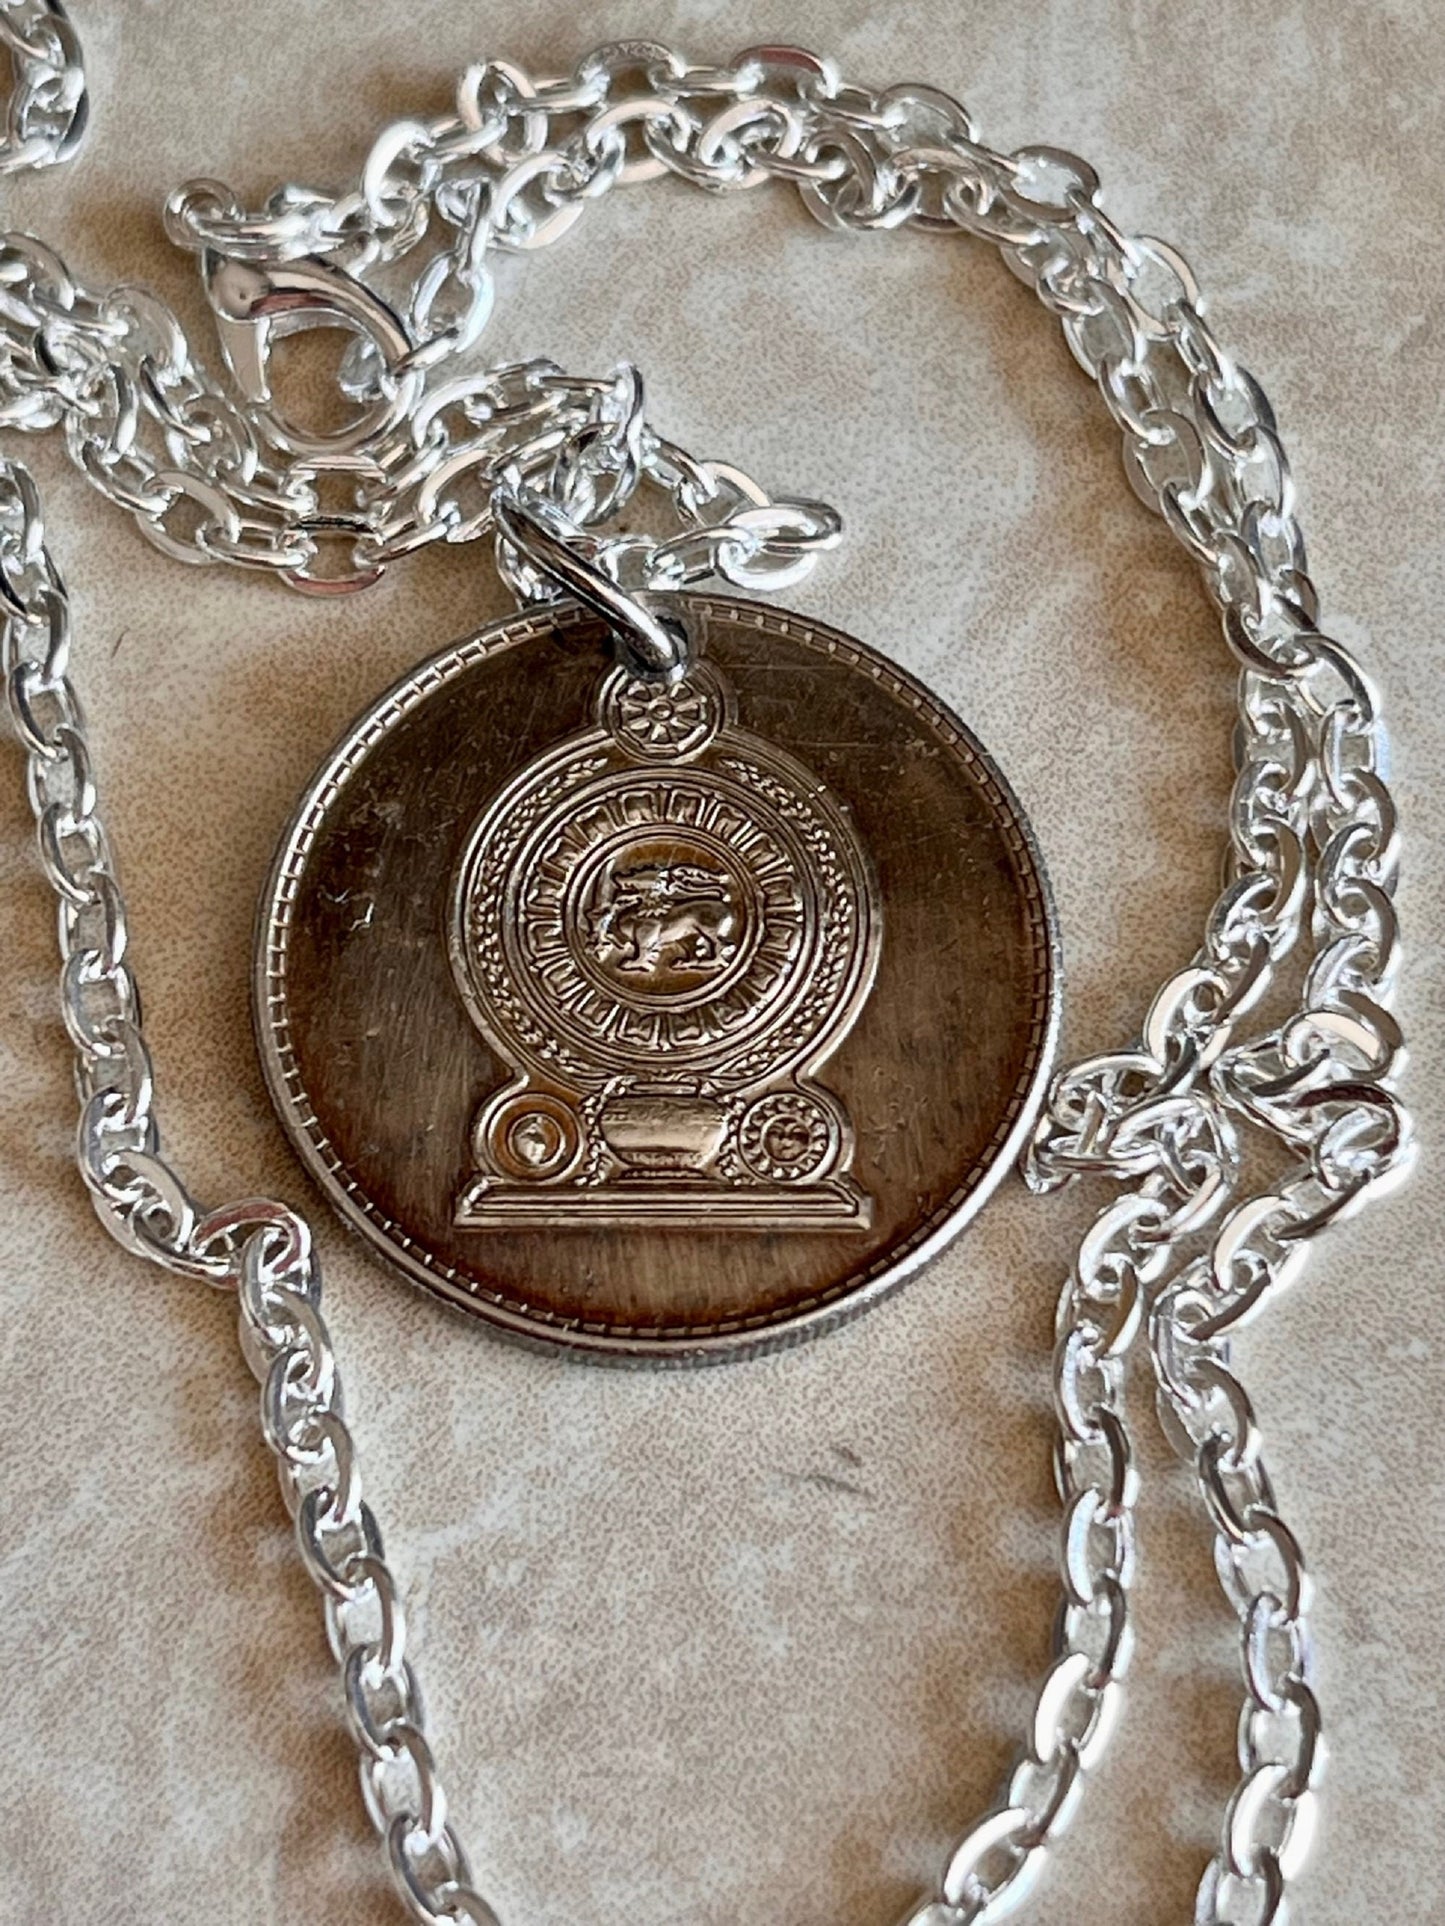 Sri Lanka Coin Necklace 1 Rupee Coin Pendant Handmade Custom Made Charm Gift For Friend Coin Charm Gift For Him, Coin Collector, World Coins